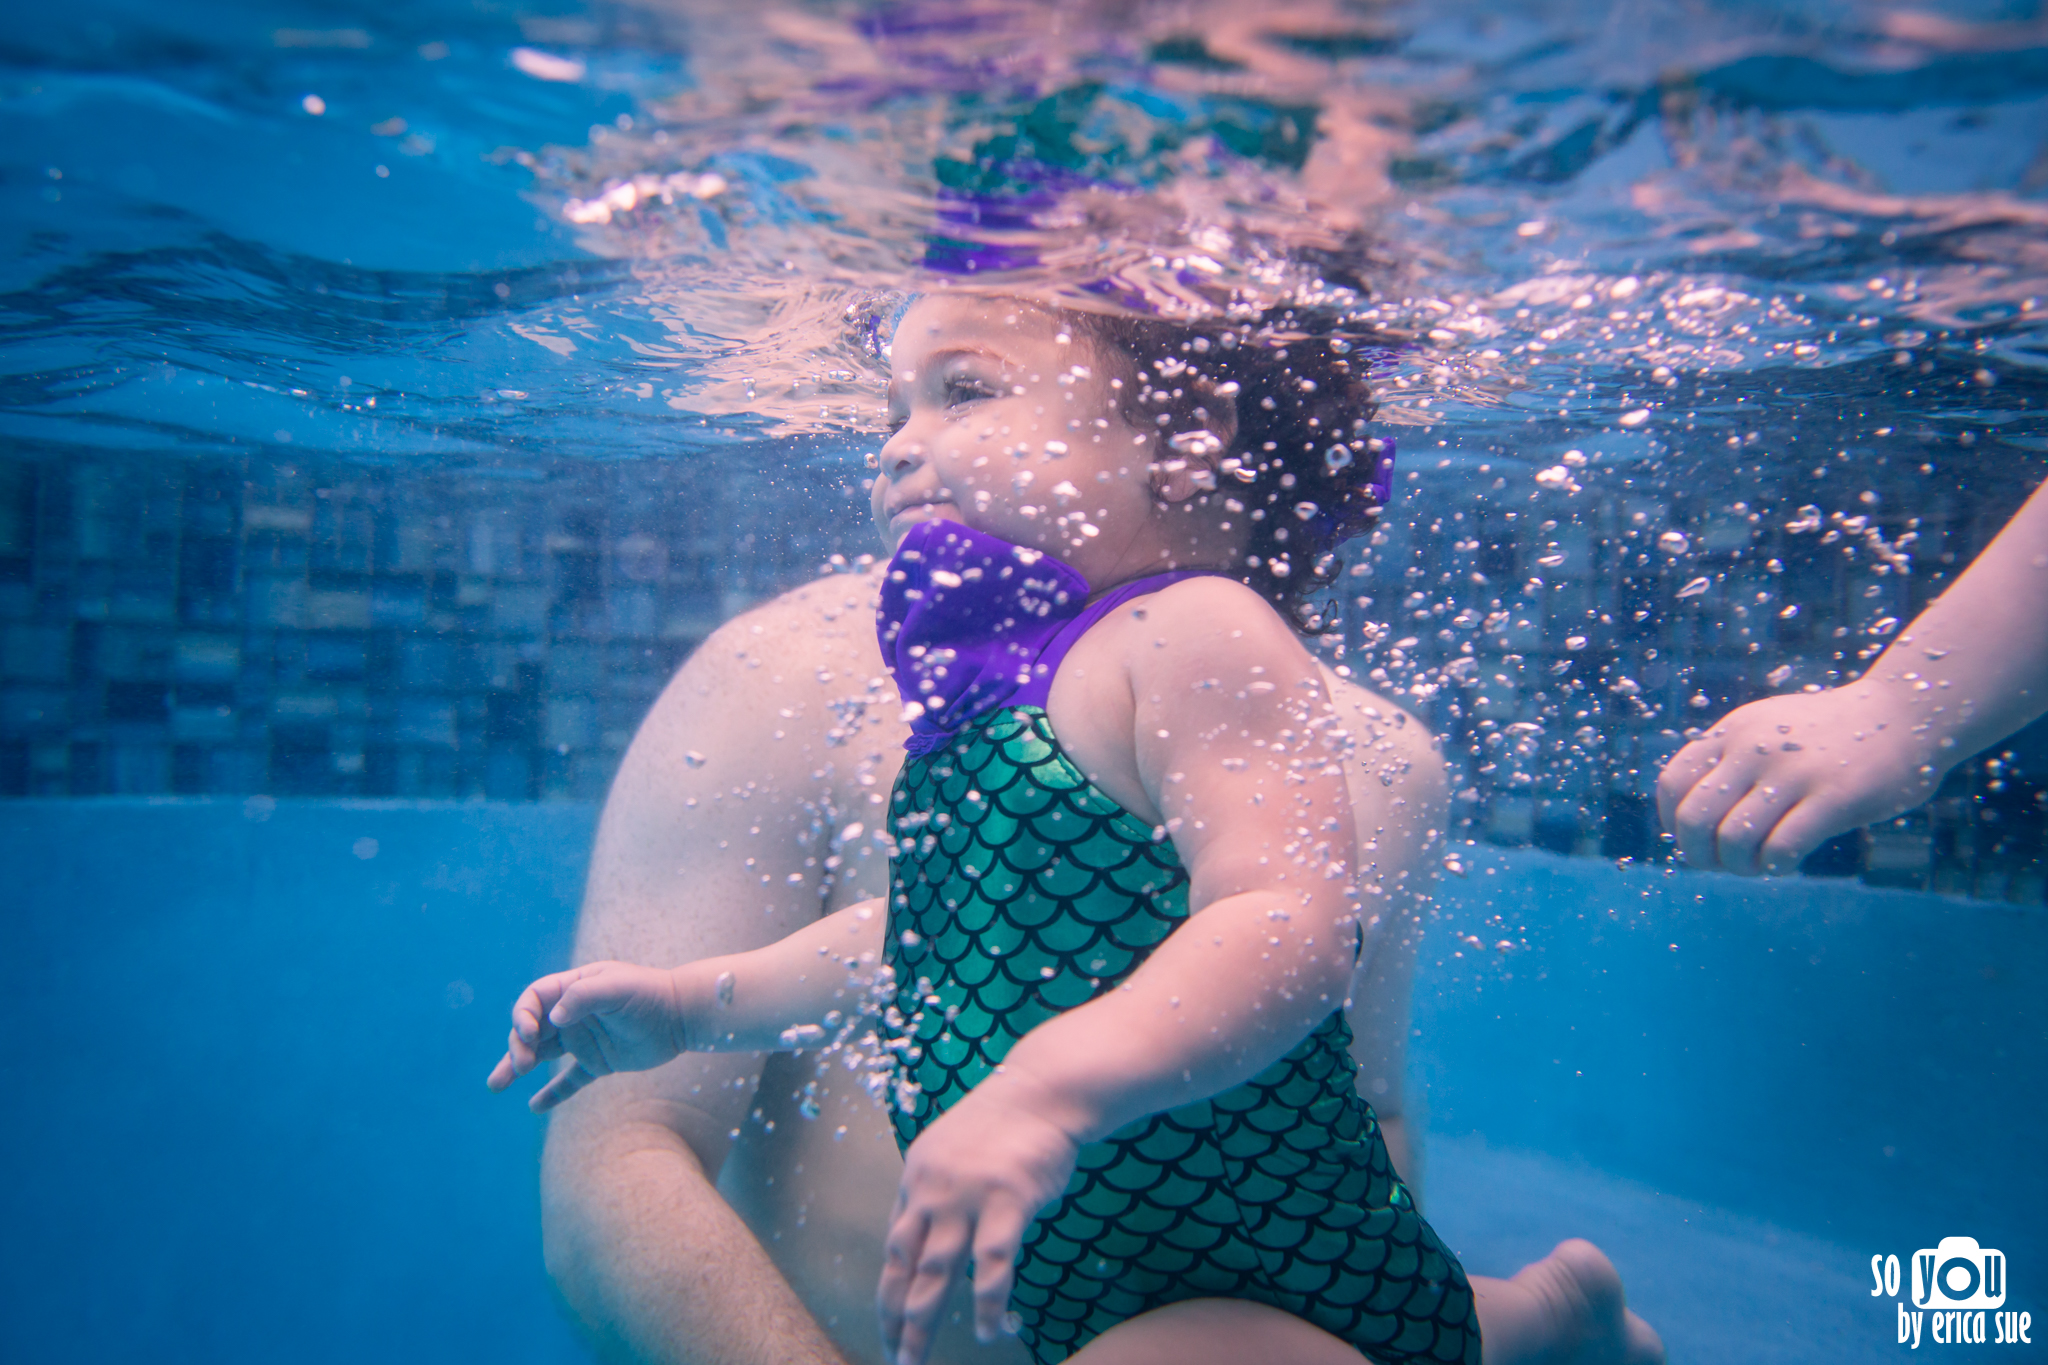 underwater-swim-family-photography-ft-lauderdale-so-you-by-erica-sue-1576.jpg